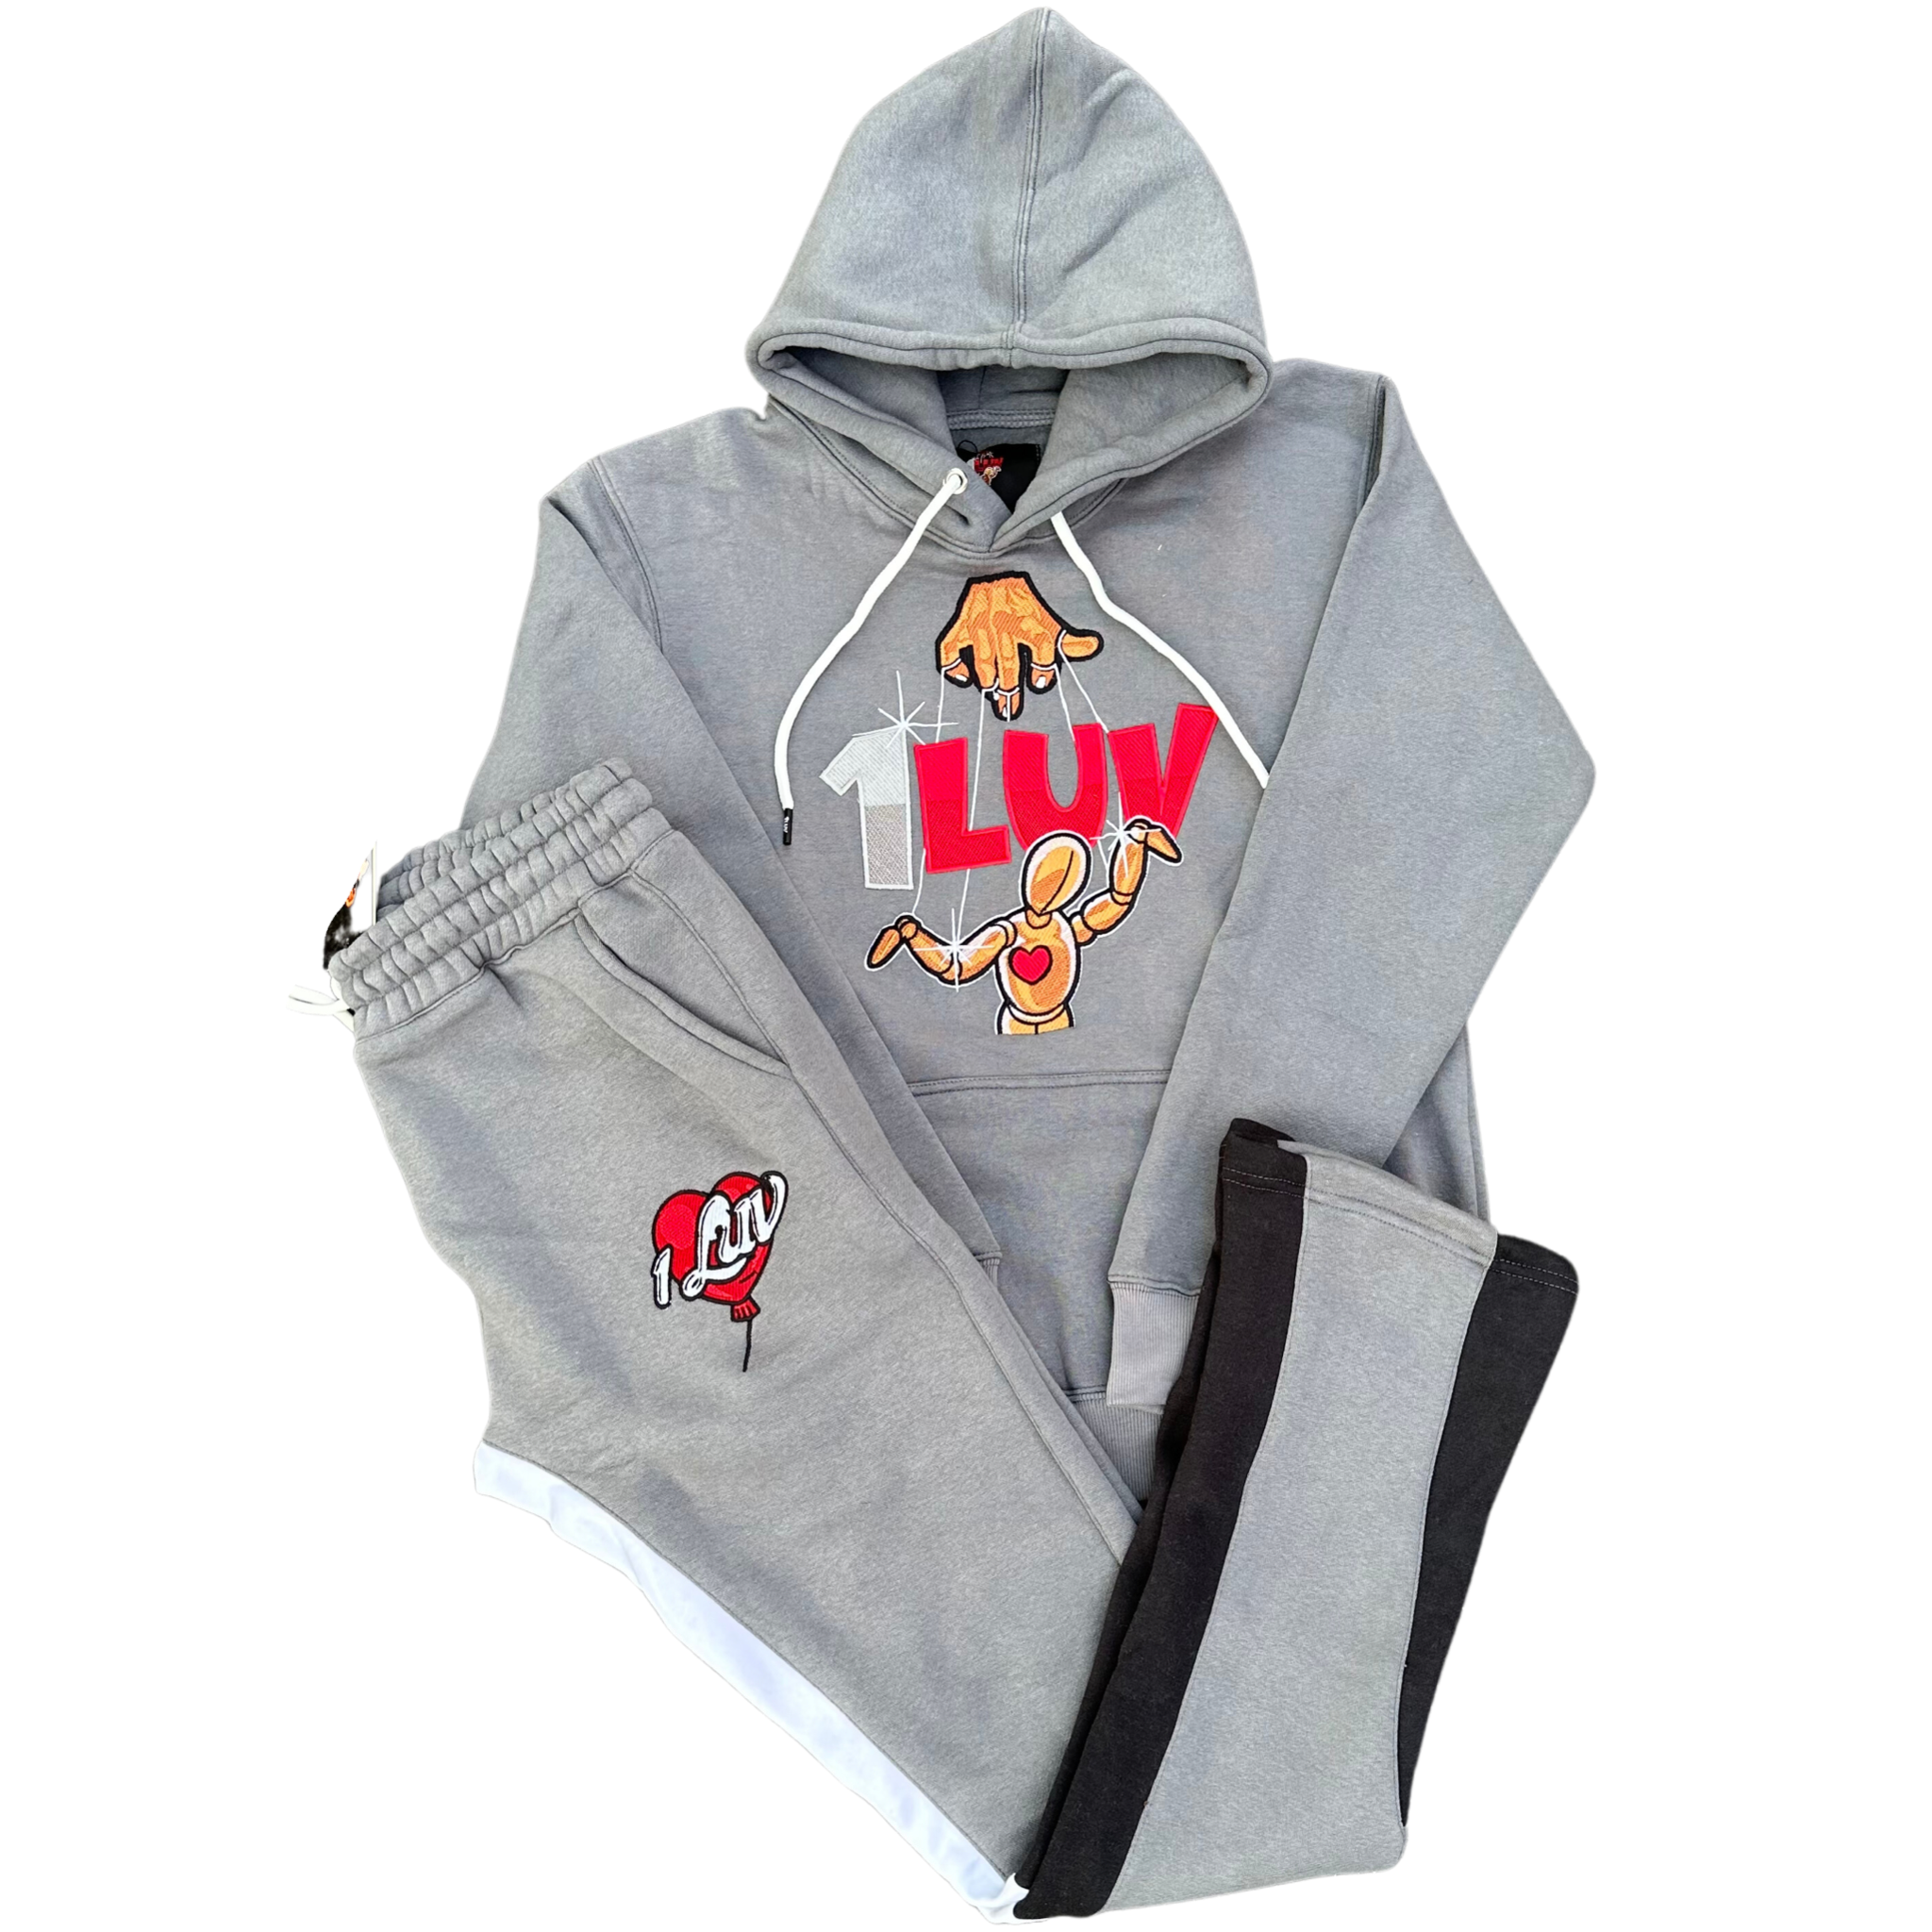 1Luv “Gray" Flared Jogging Suit